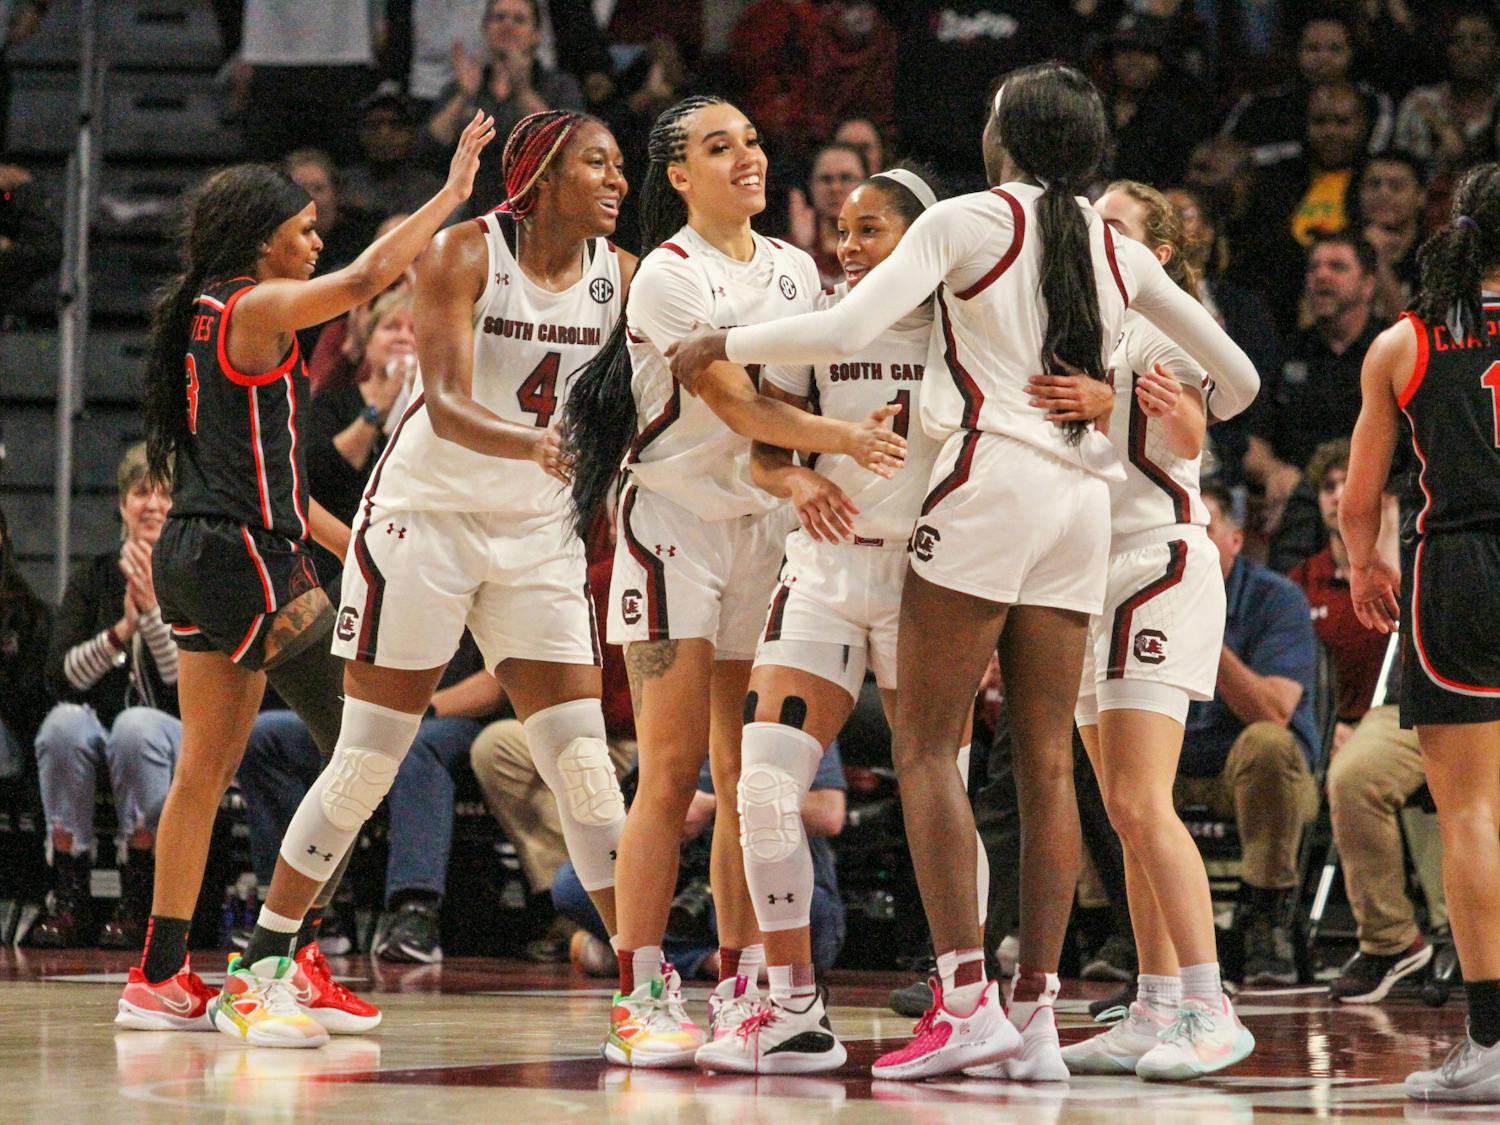 South Carolina women's basketball team claimed the SEC regular season championship following its 73-63 victory over the Georgia Bulldogs at Colonial Life Arena on Feb. 26, 2023. The Gamecocks remain undefeated heading into the SEC tournament next week in Greenville, South Carolina.